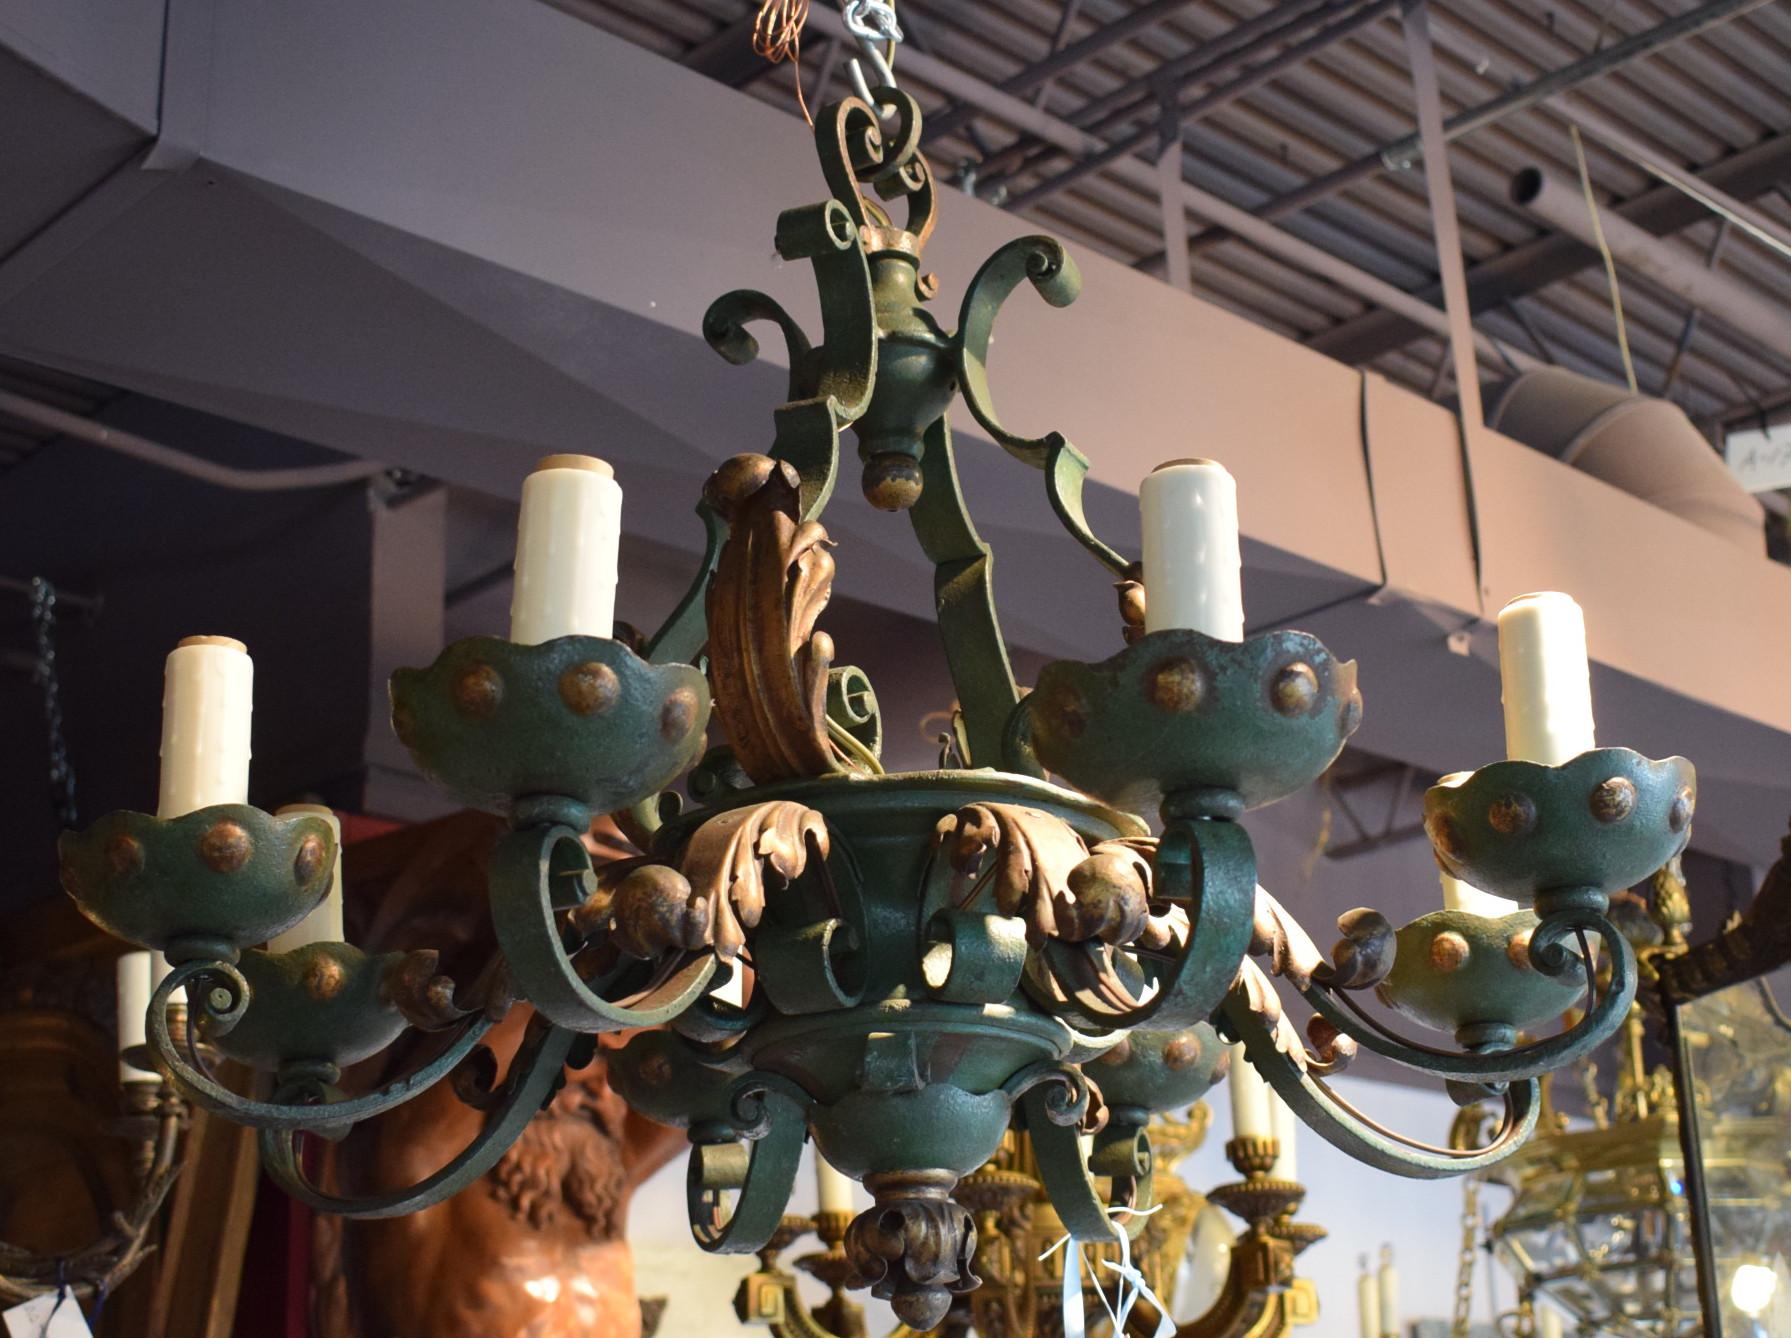 A fine and elegant iron chandelier. Original green and gold patina. 8-light, France, circa 1920
Dimensions: Height 24